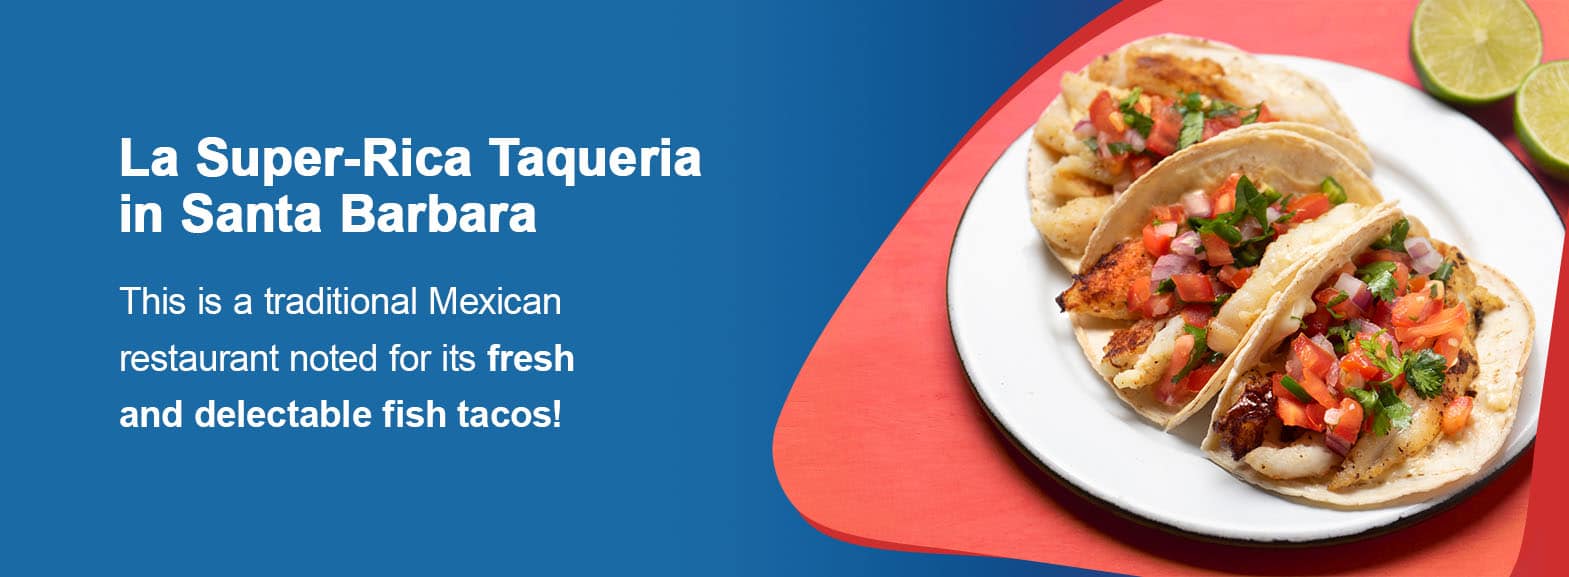 La Super-Rica Taqueria in Santa Barbara is a traditional Mexican restaurant noted for its fresh and delectable fish tacos!